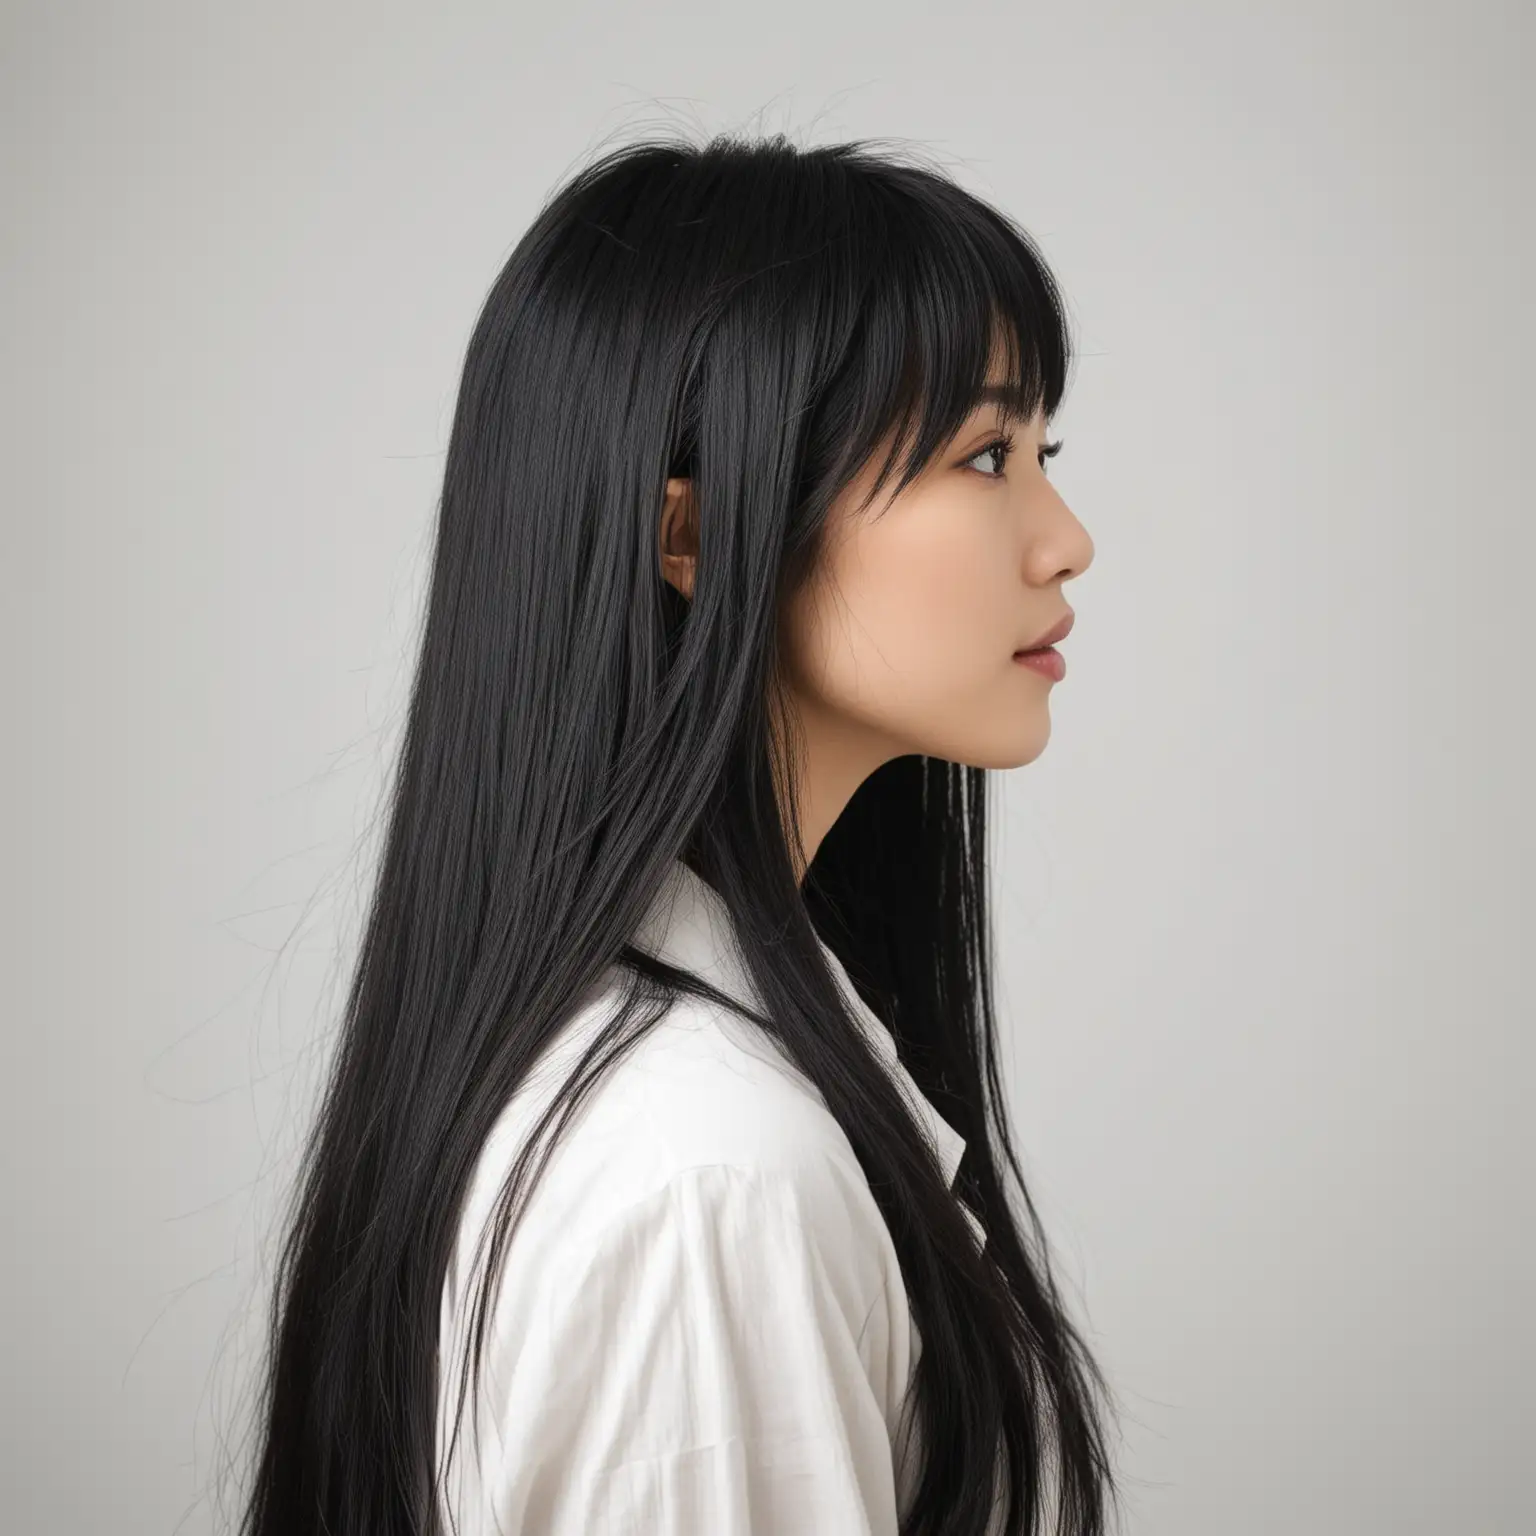 Beautiful Japanese Woman with Long Black Hair in Side Profile Portrait